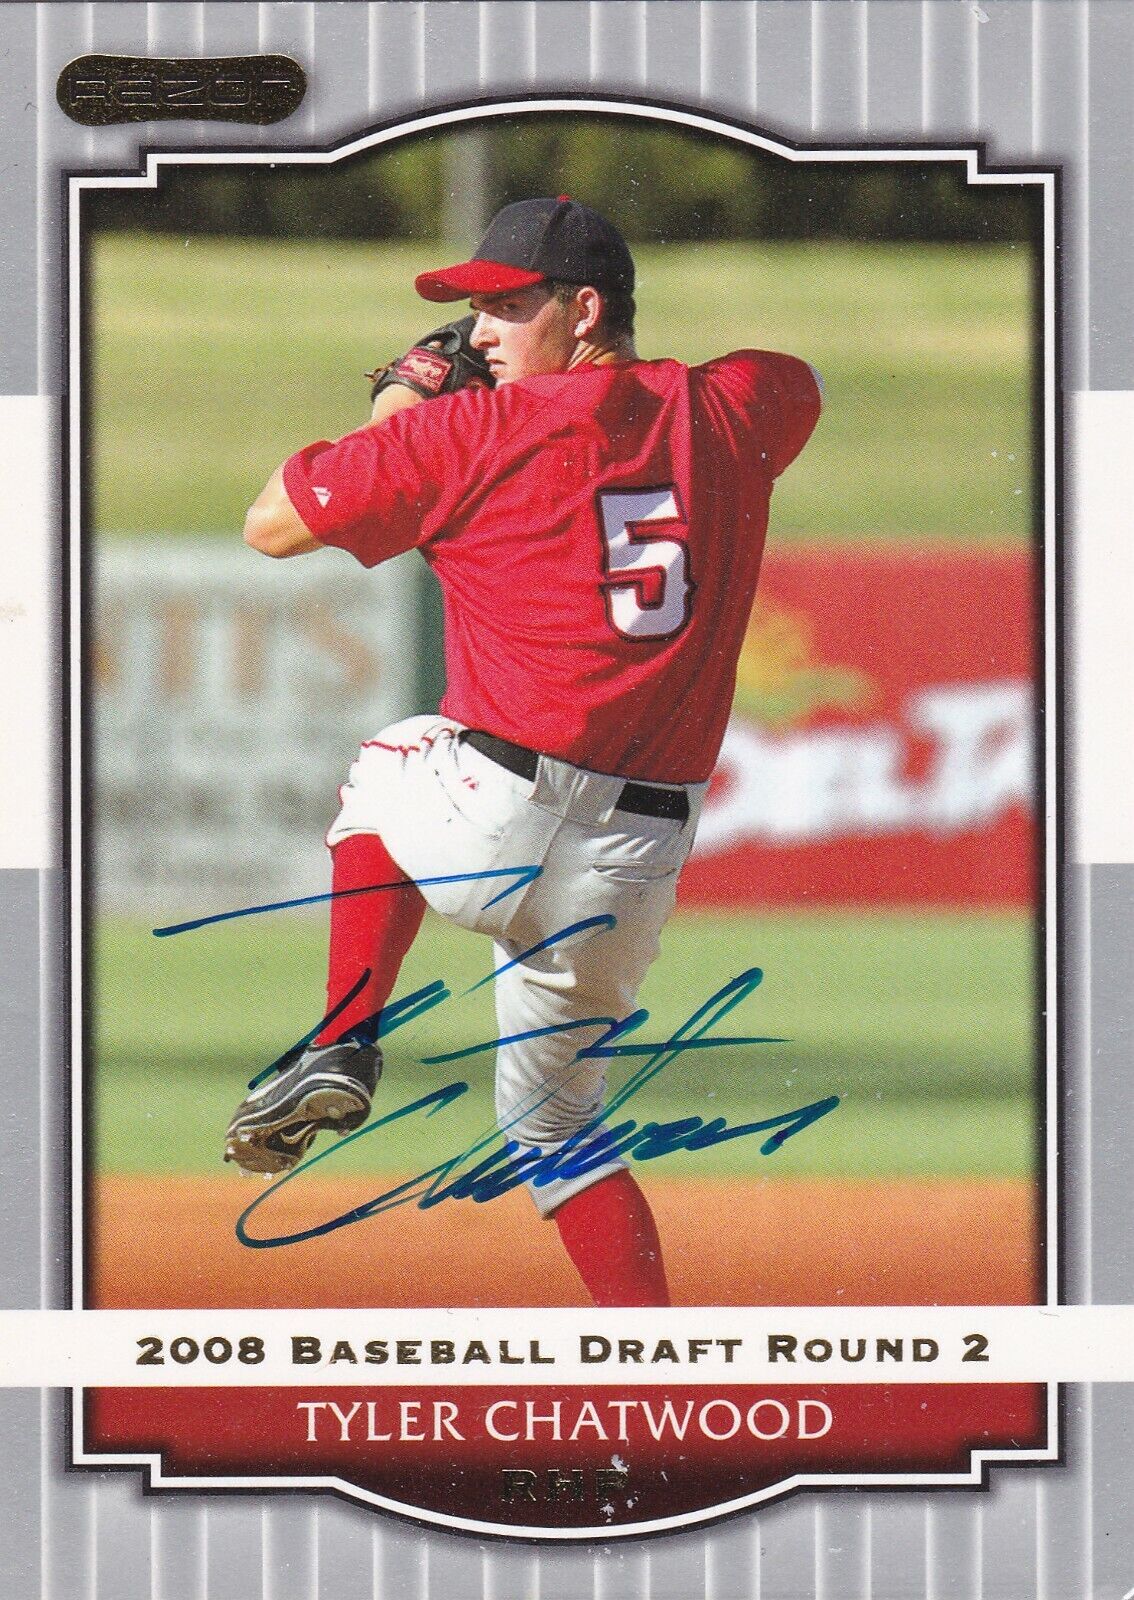 TYLER CHATWOOD LOS ANGELES ANGELS SIGNED 2008 CARD BLUE JAYS CUBS GIANTS ROCKIES